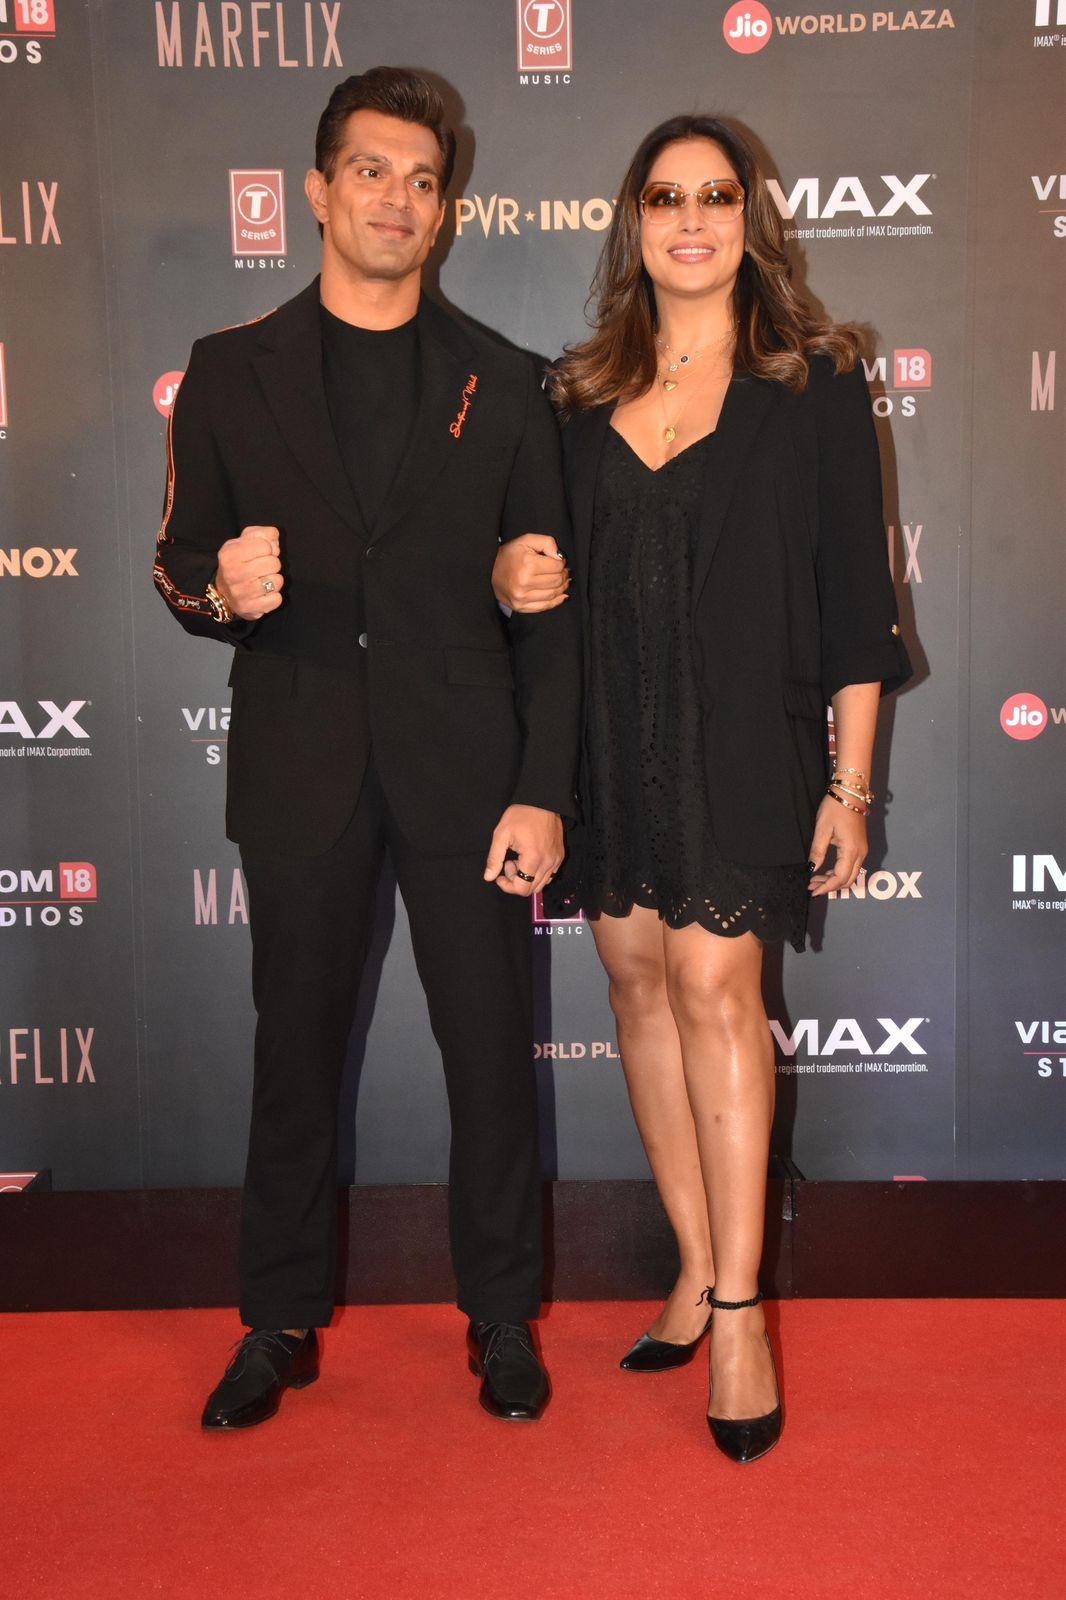 Karan Singh Grover and Bipasha Basu twinned in black as they joined their contemporaries at the movie premiere